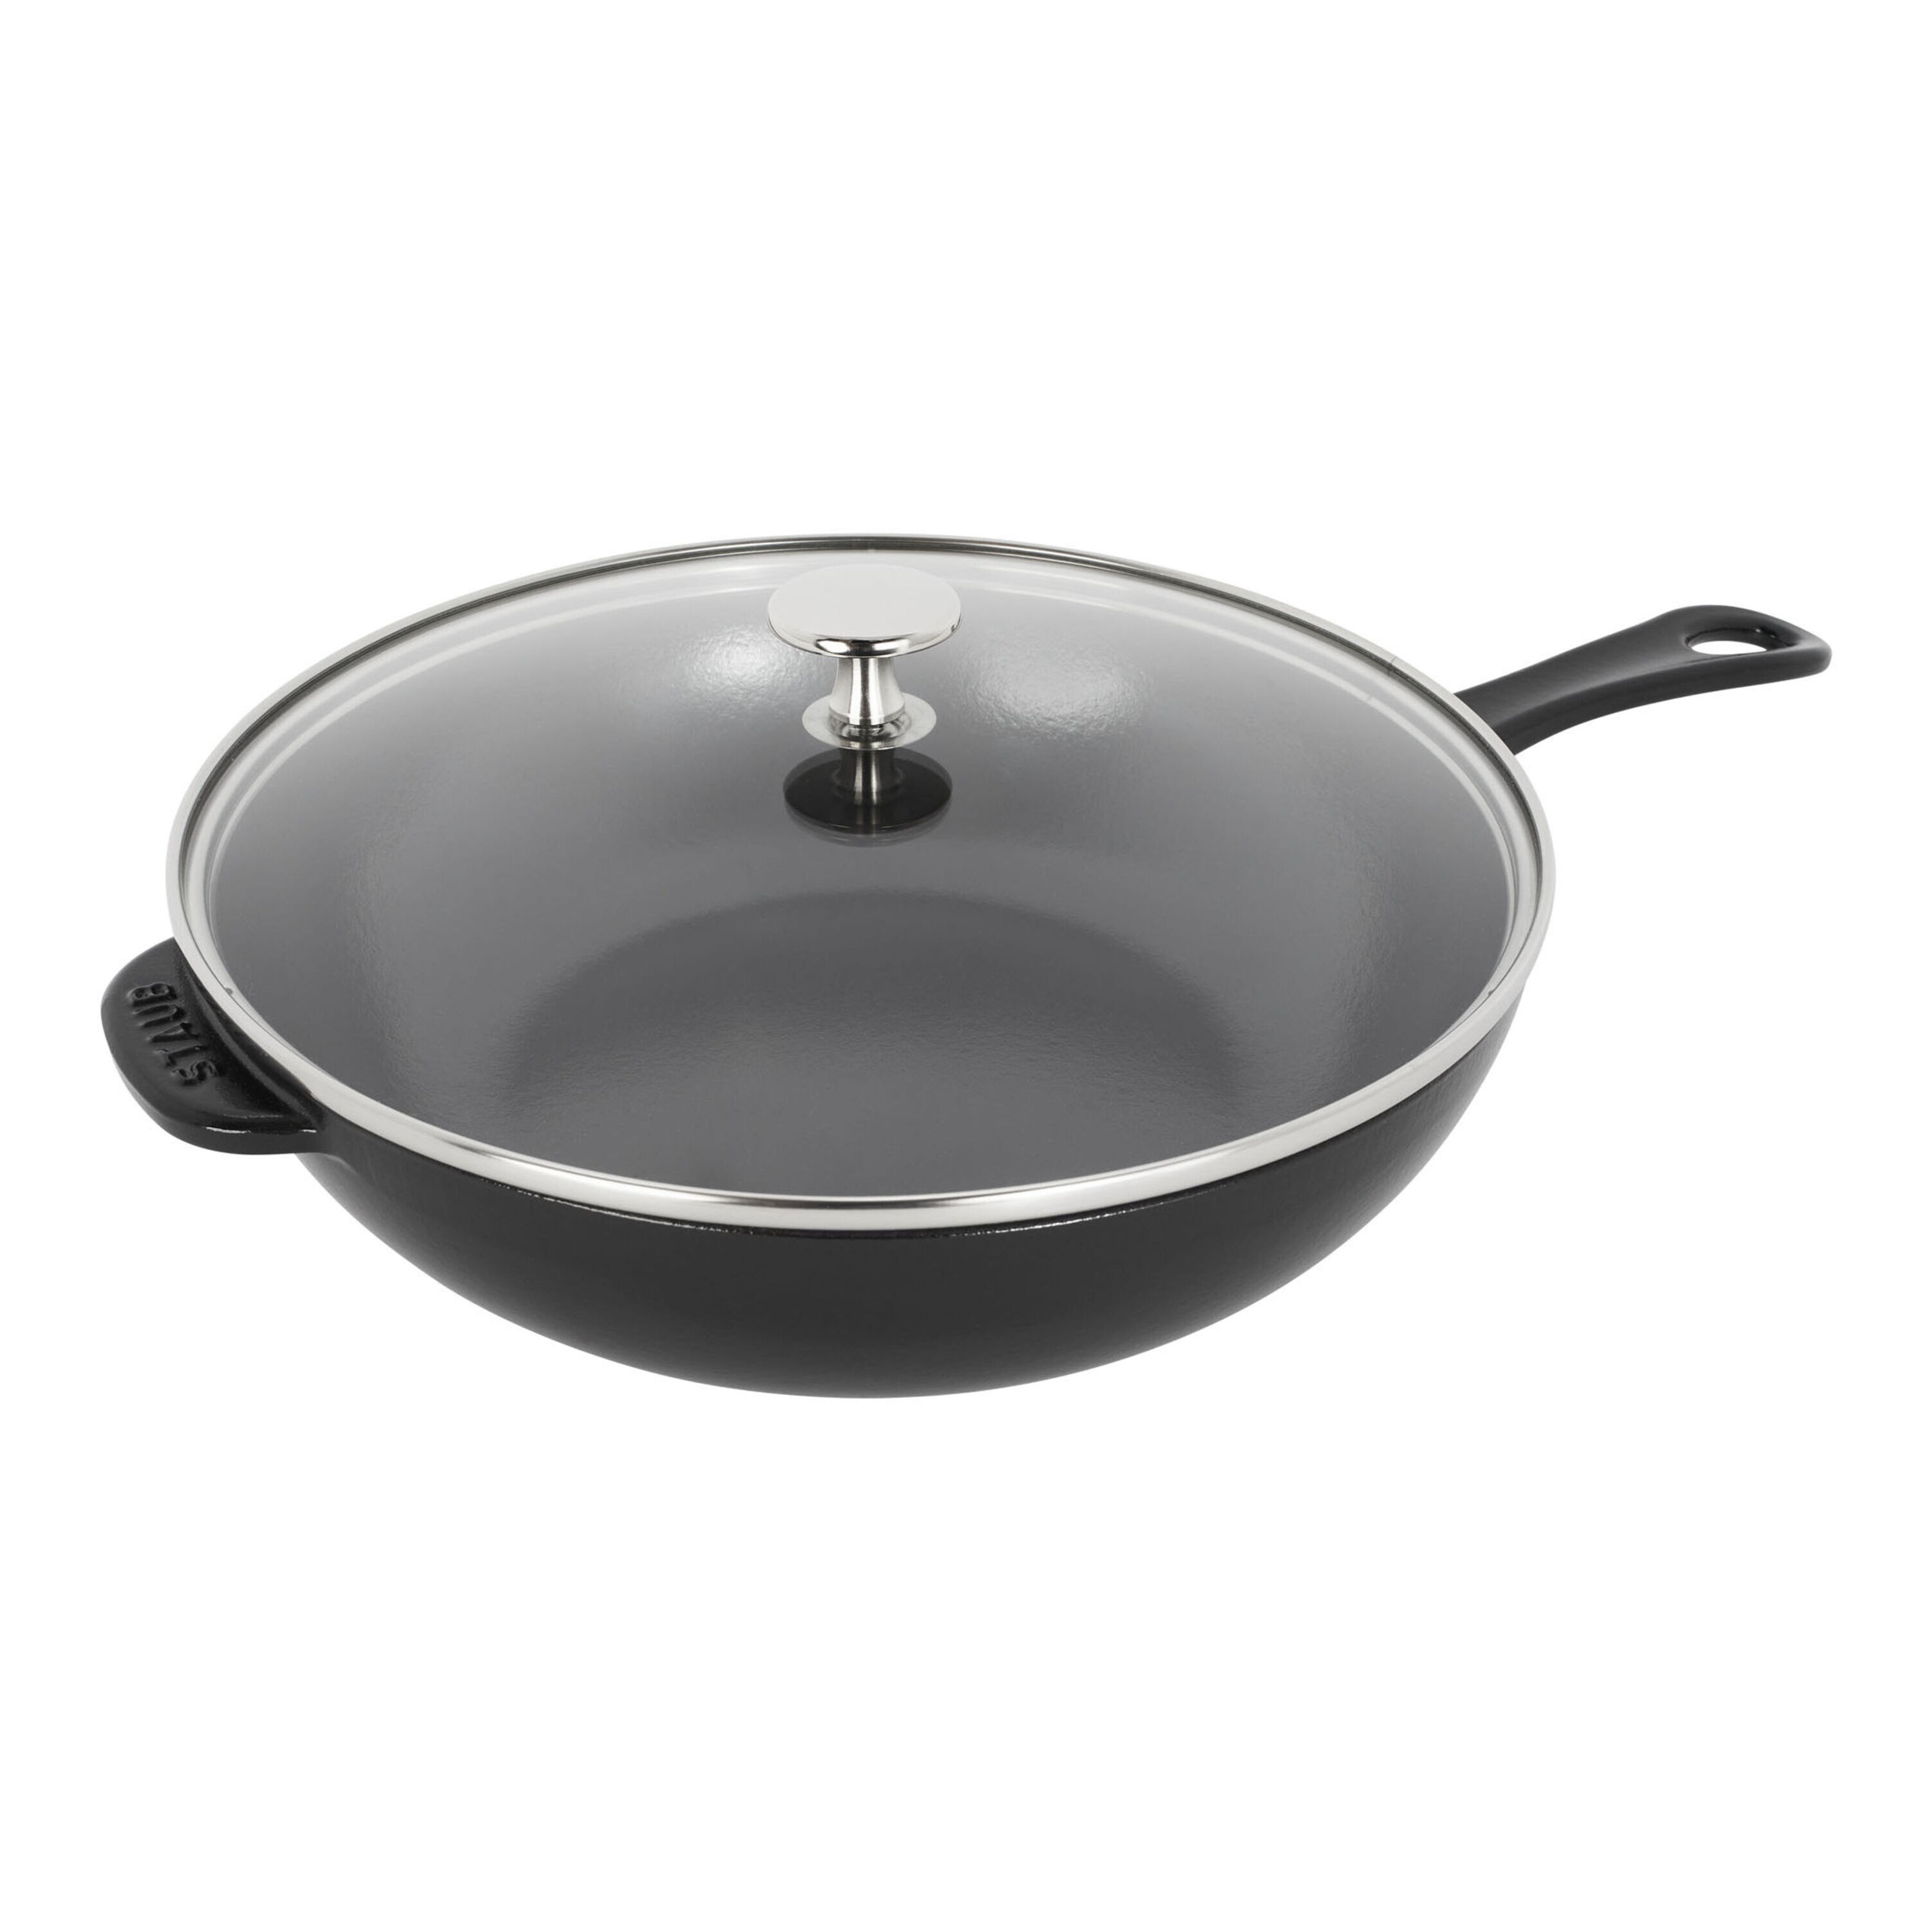 T-Fal Cookware: Their Non-Stick Pans are a Personal Obsession